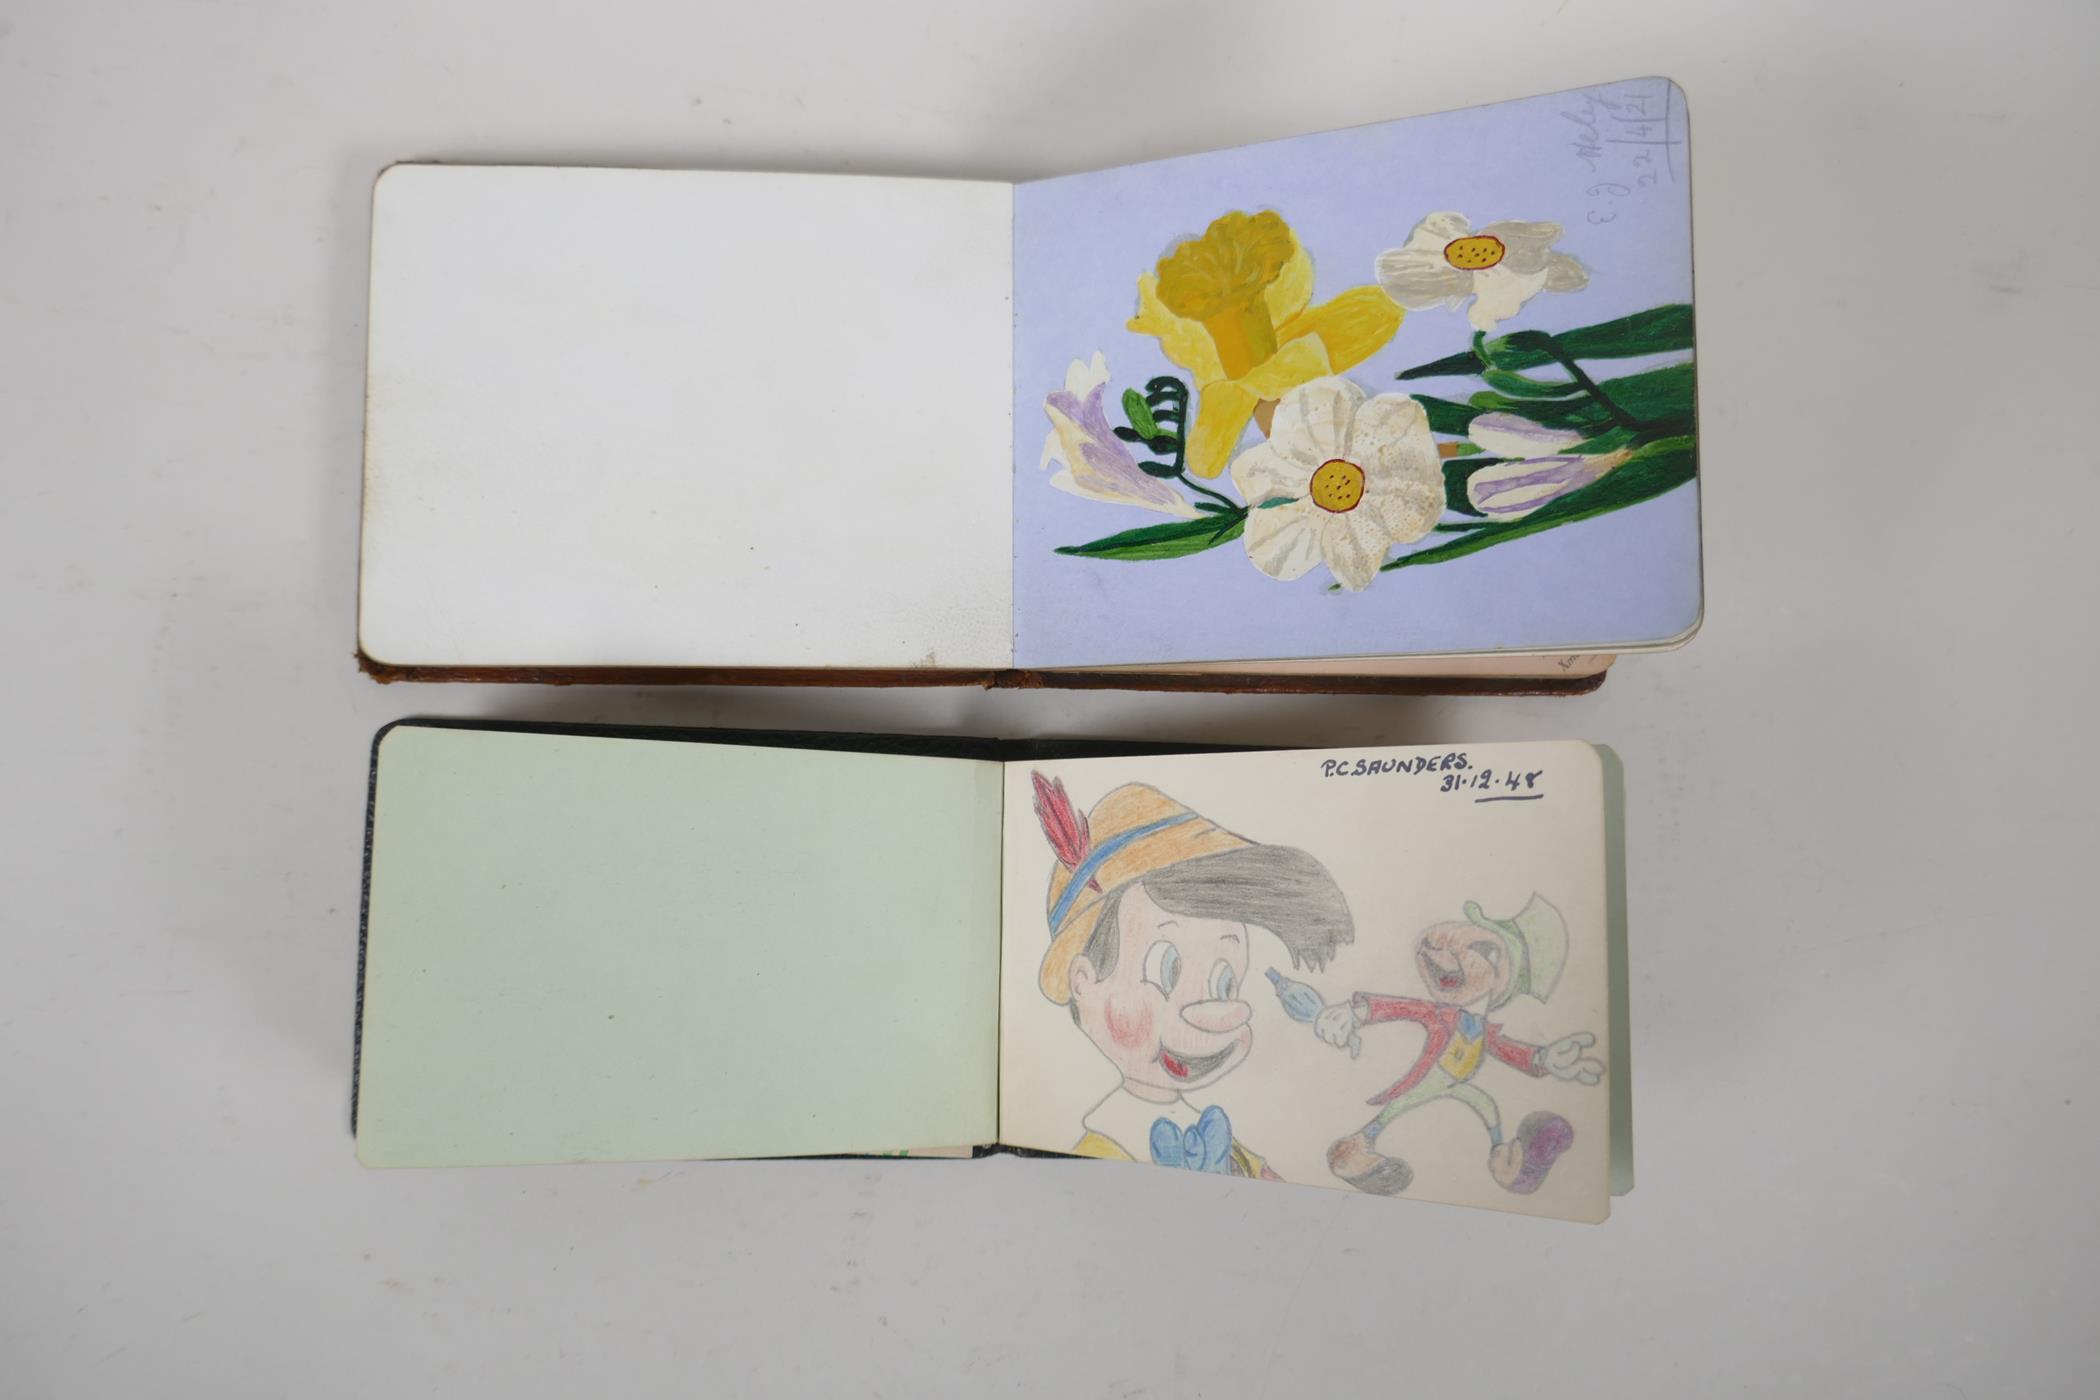 Two early to mid C20th autograph albums containing sketches, watercolours and oils, largest 5½" x